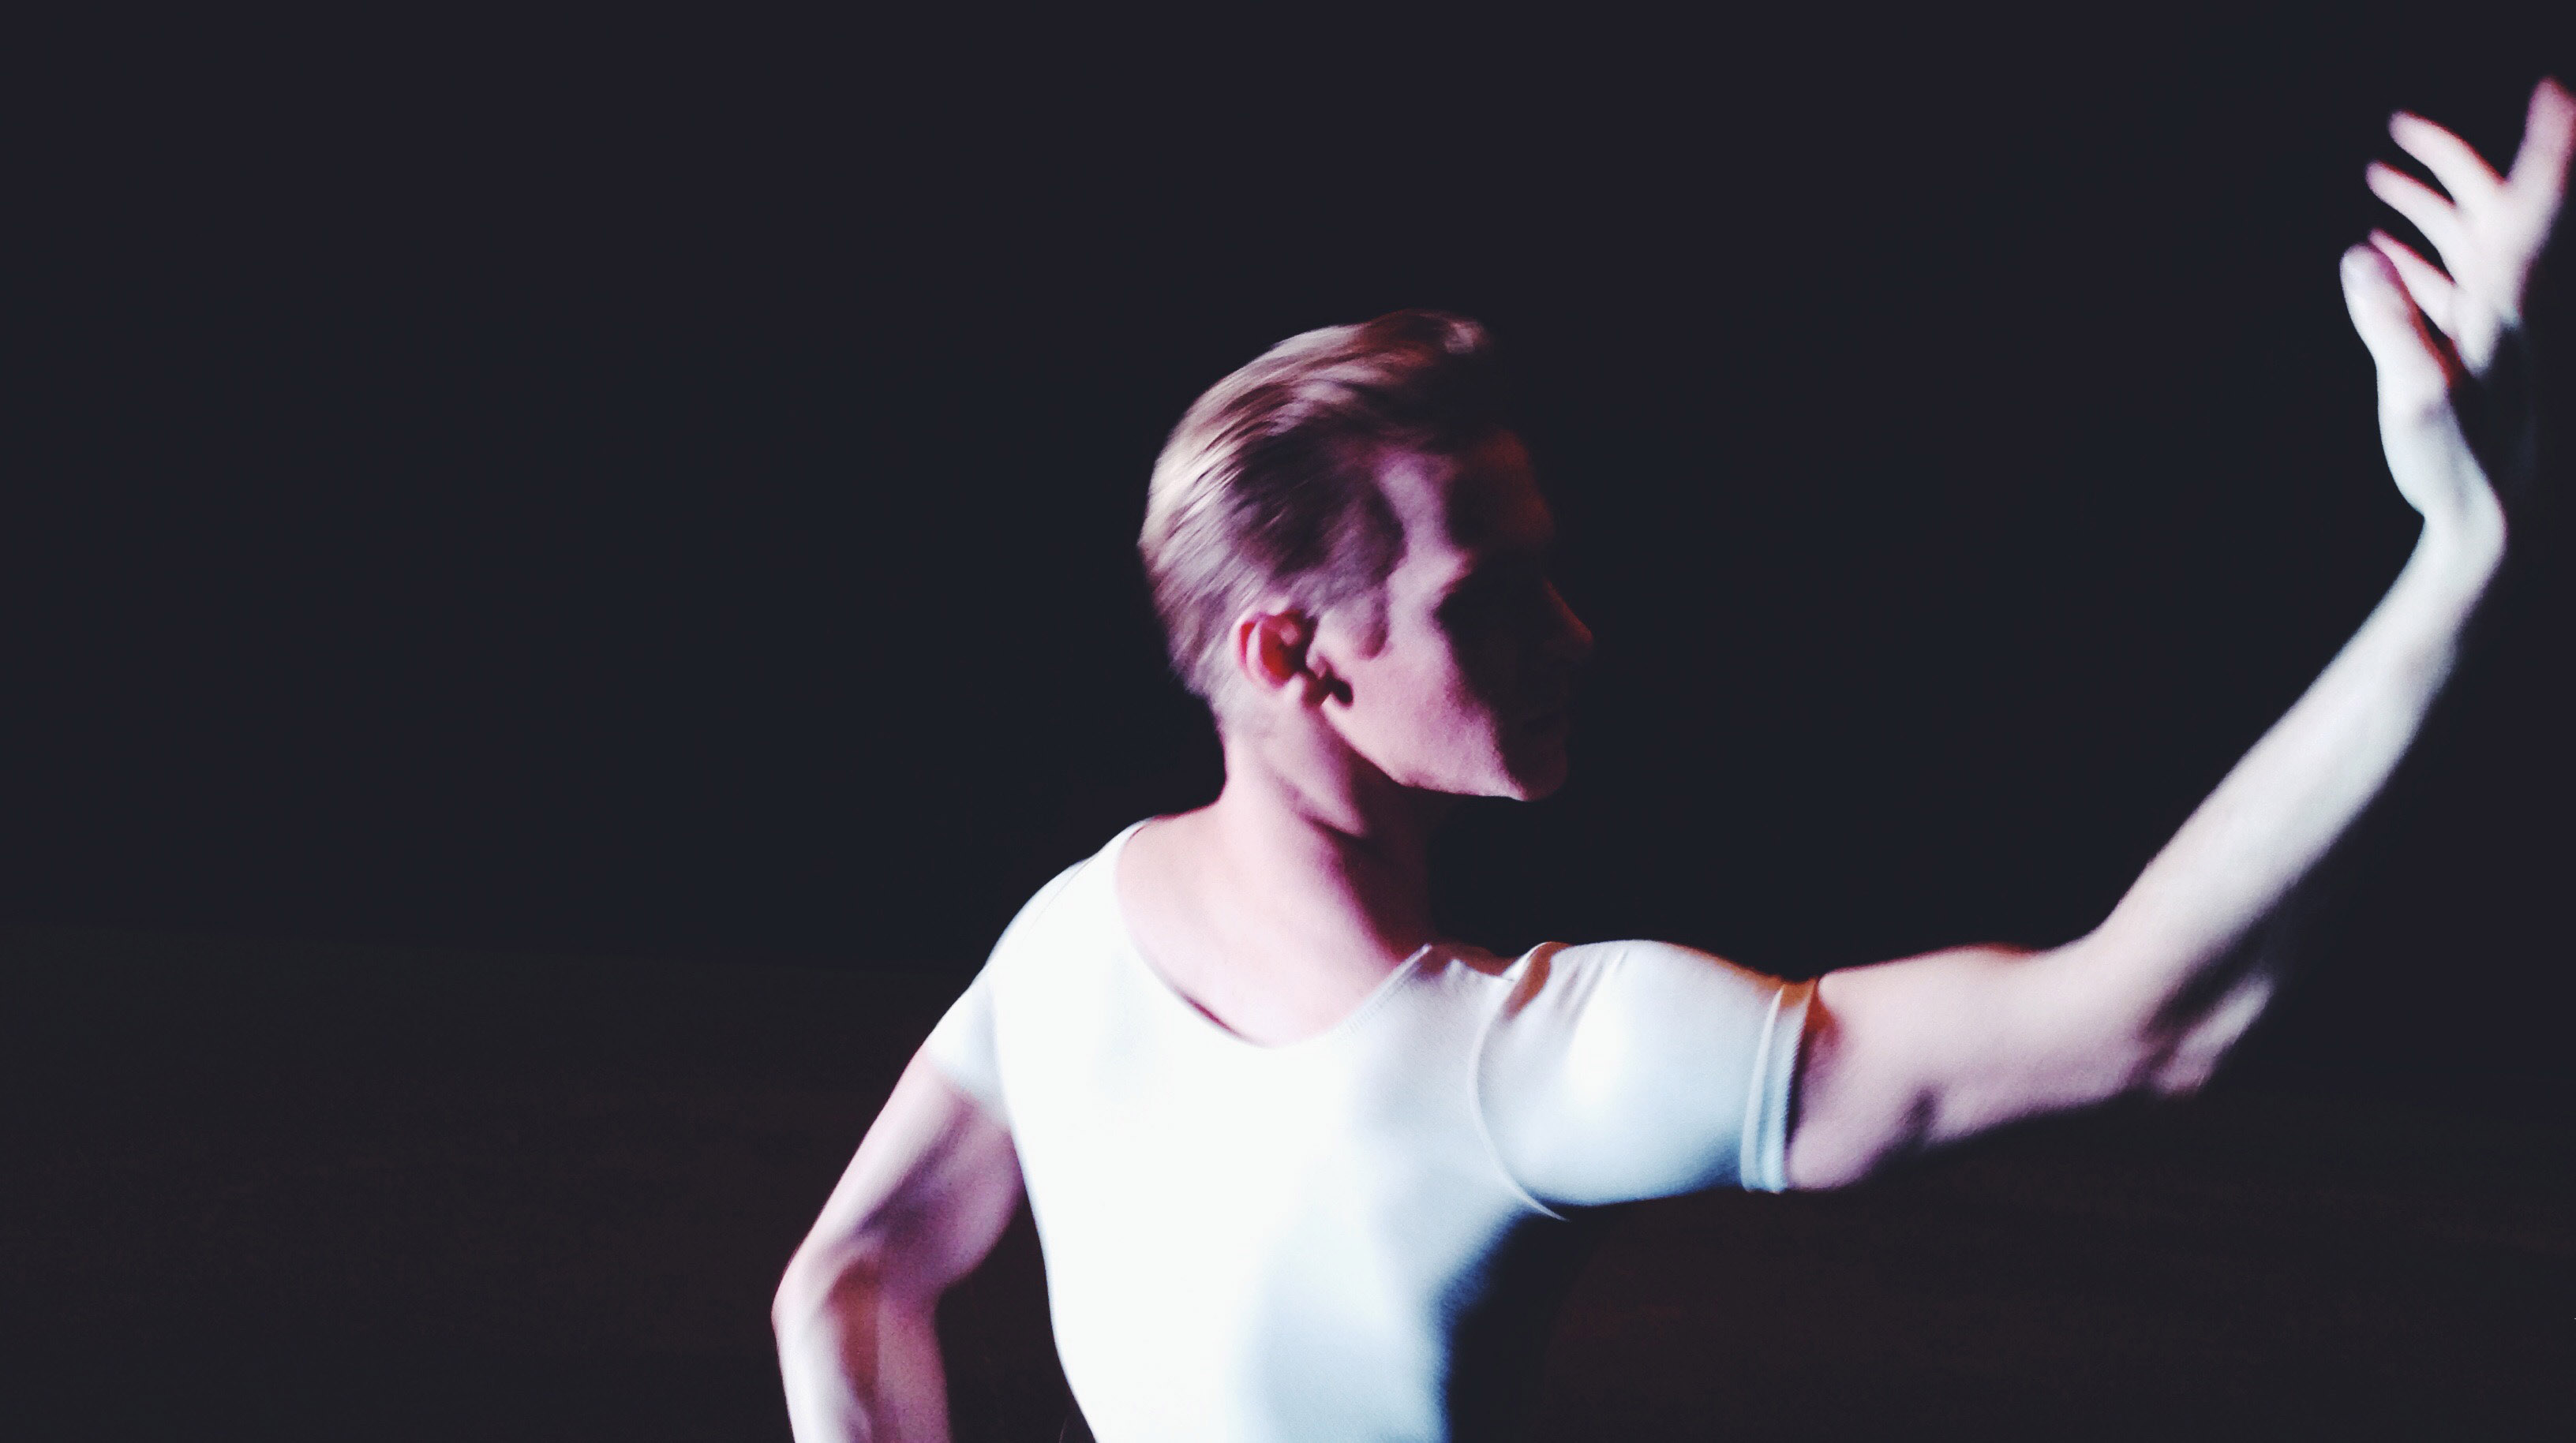 Lars Nelson doing ballet on a dark stage, with one hand raised in the air